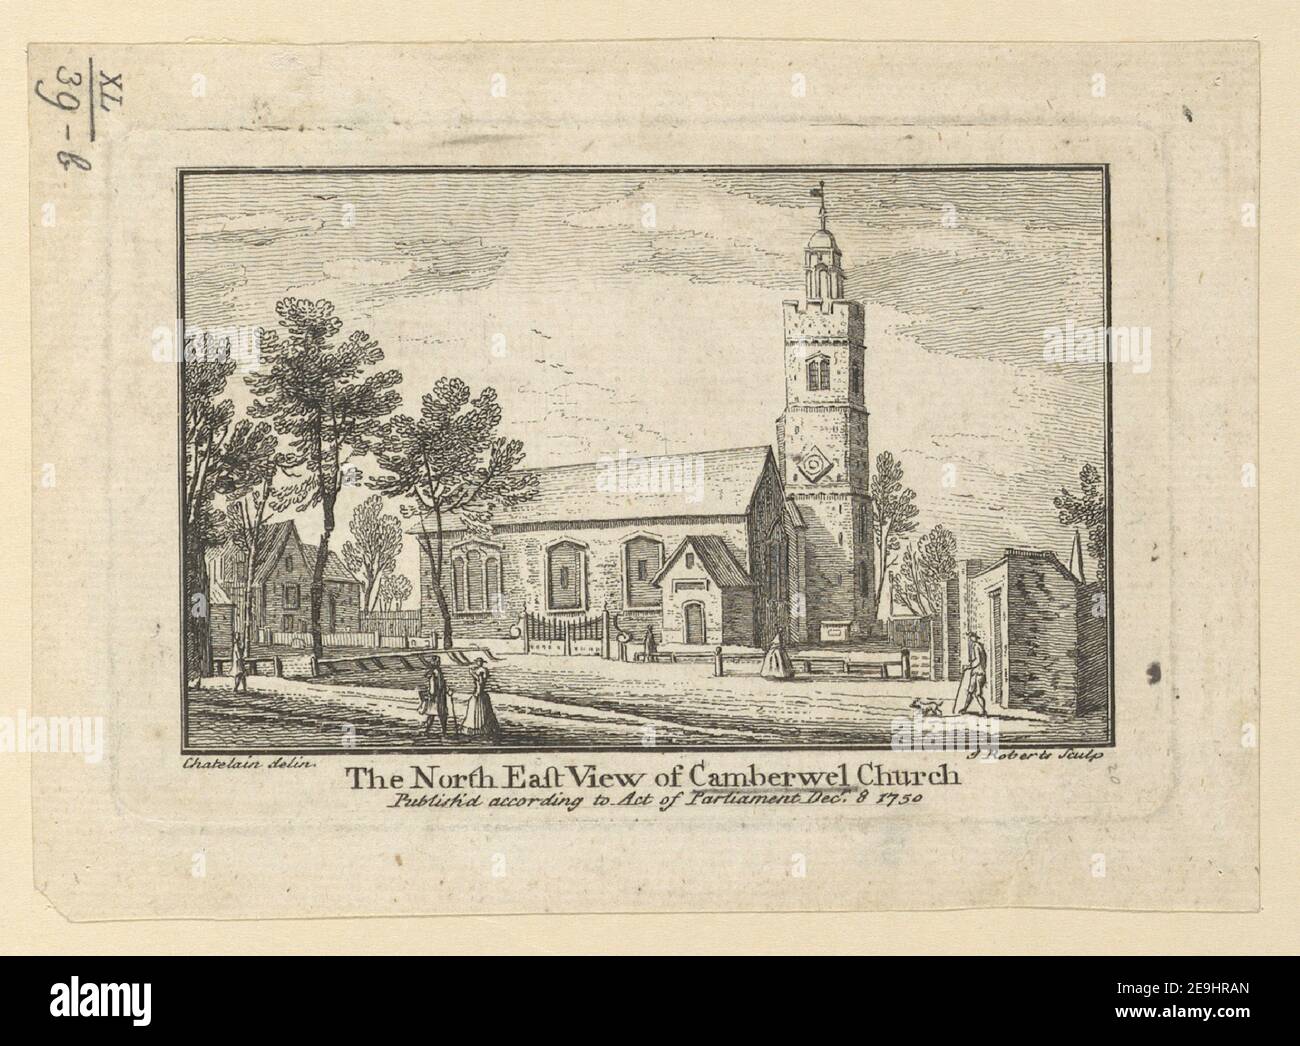 The North East View of Camberwell Church.  Author  Roberts, James 40.39.b. Place of publication: [London] Publisher: Publish'd according to Act of Parliam.t Dec.r 8., Date of publication: 1750.  Item type: 1 print Medium: etching Dimensions: platemark 8.8 x 13.3 cm.  Former owner: George III, King of Great Britain, 1738-1820 Stock Photo